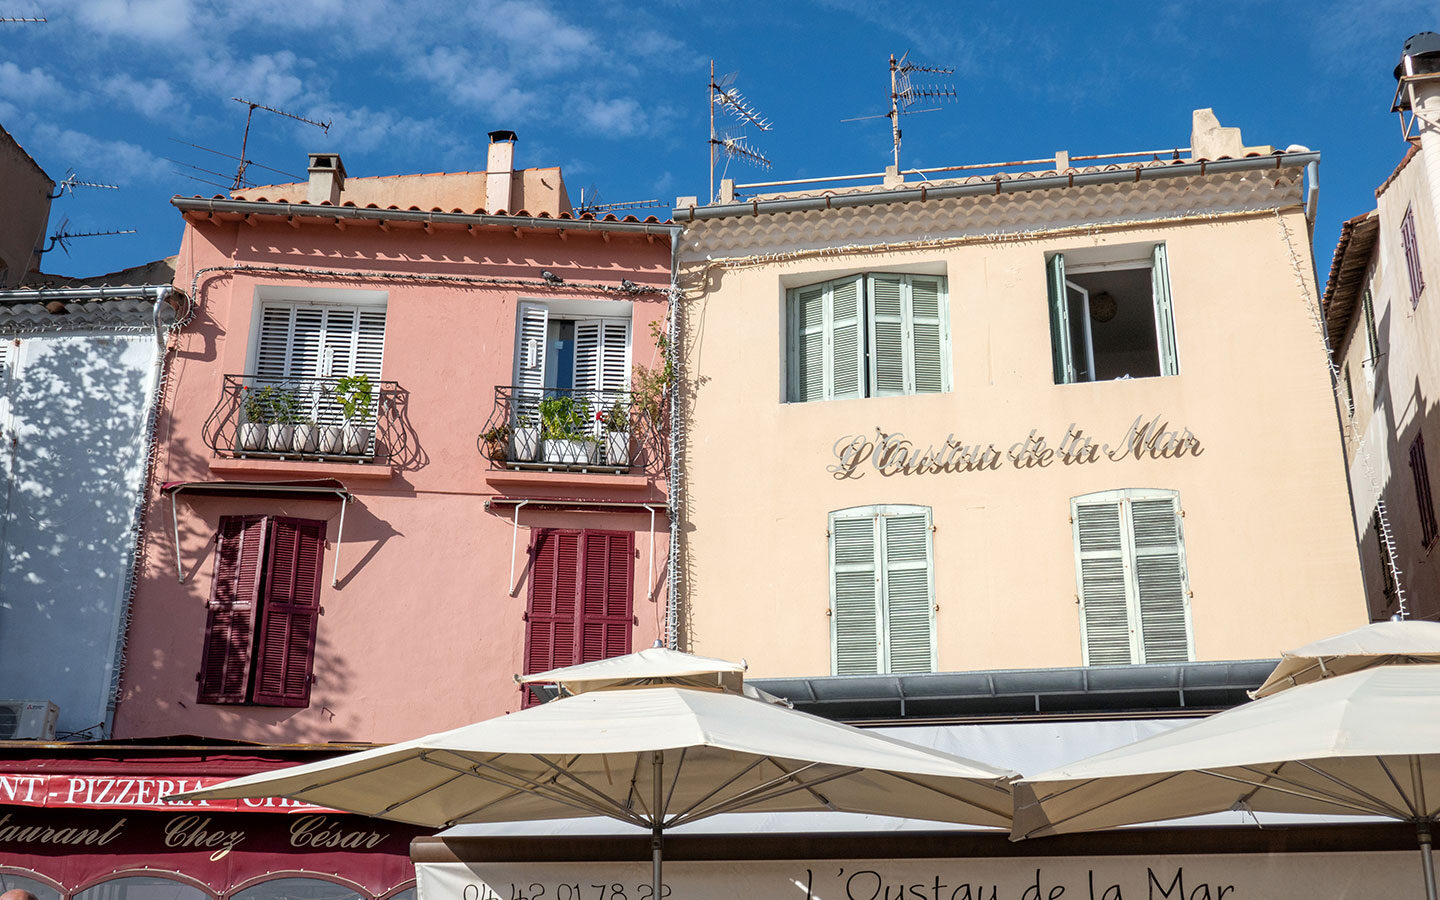 Traditional buildings in Cassis